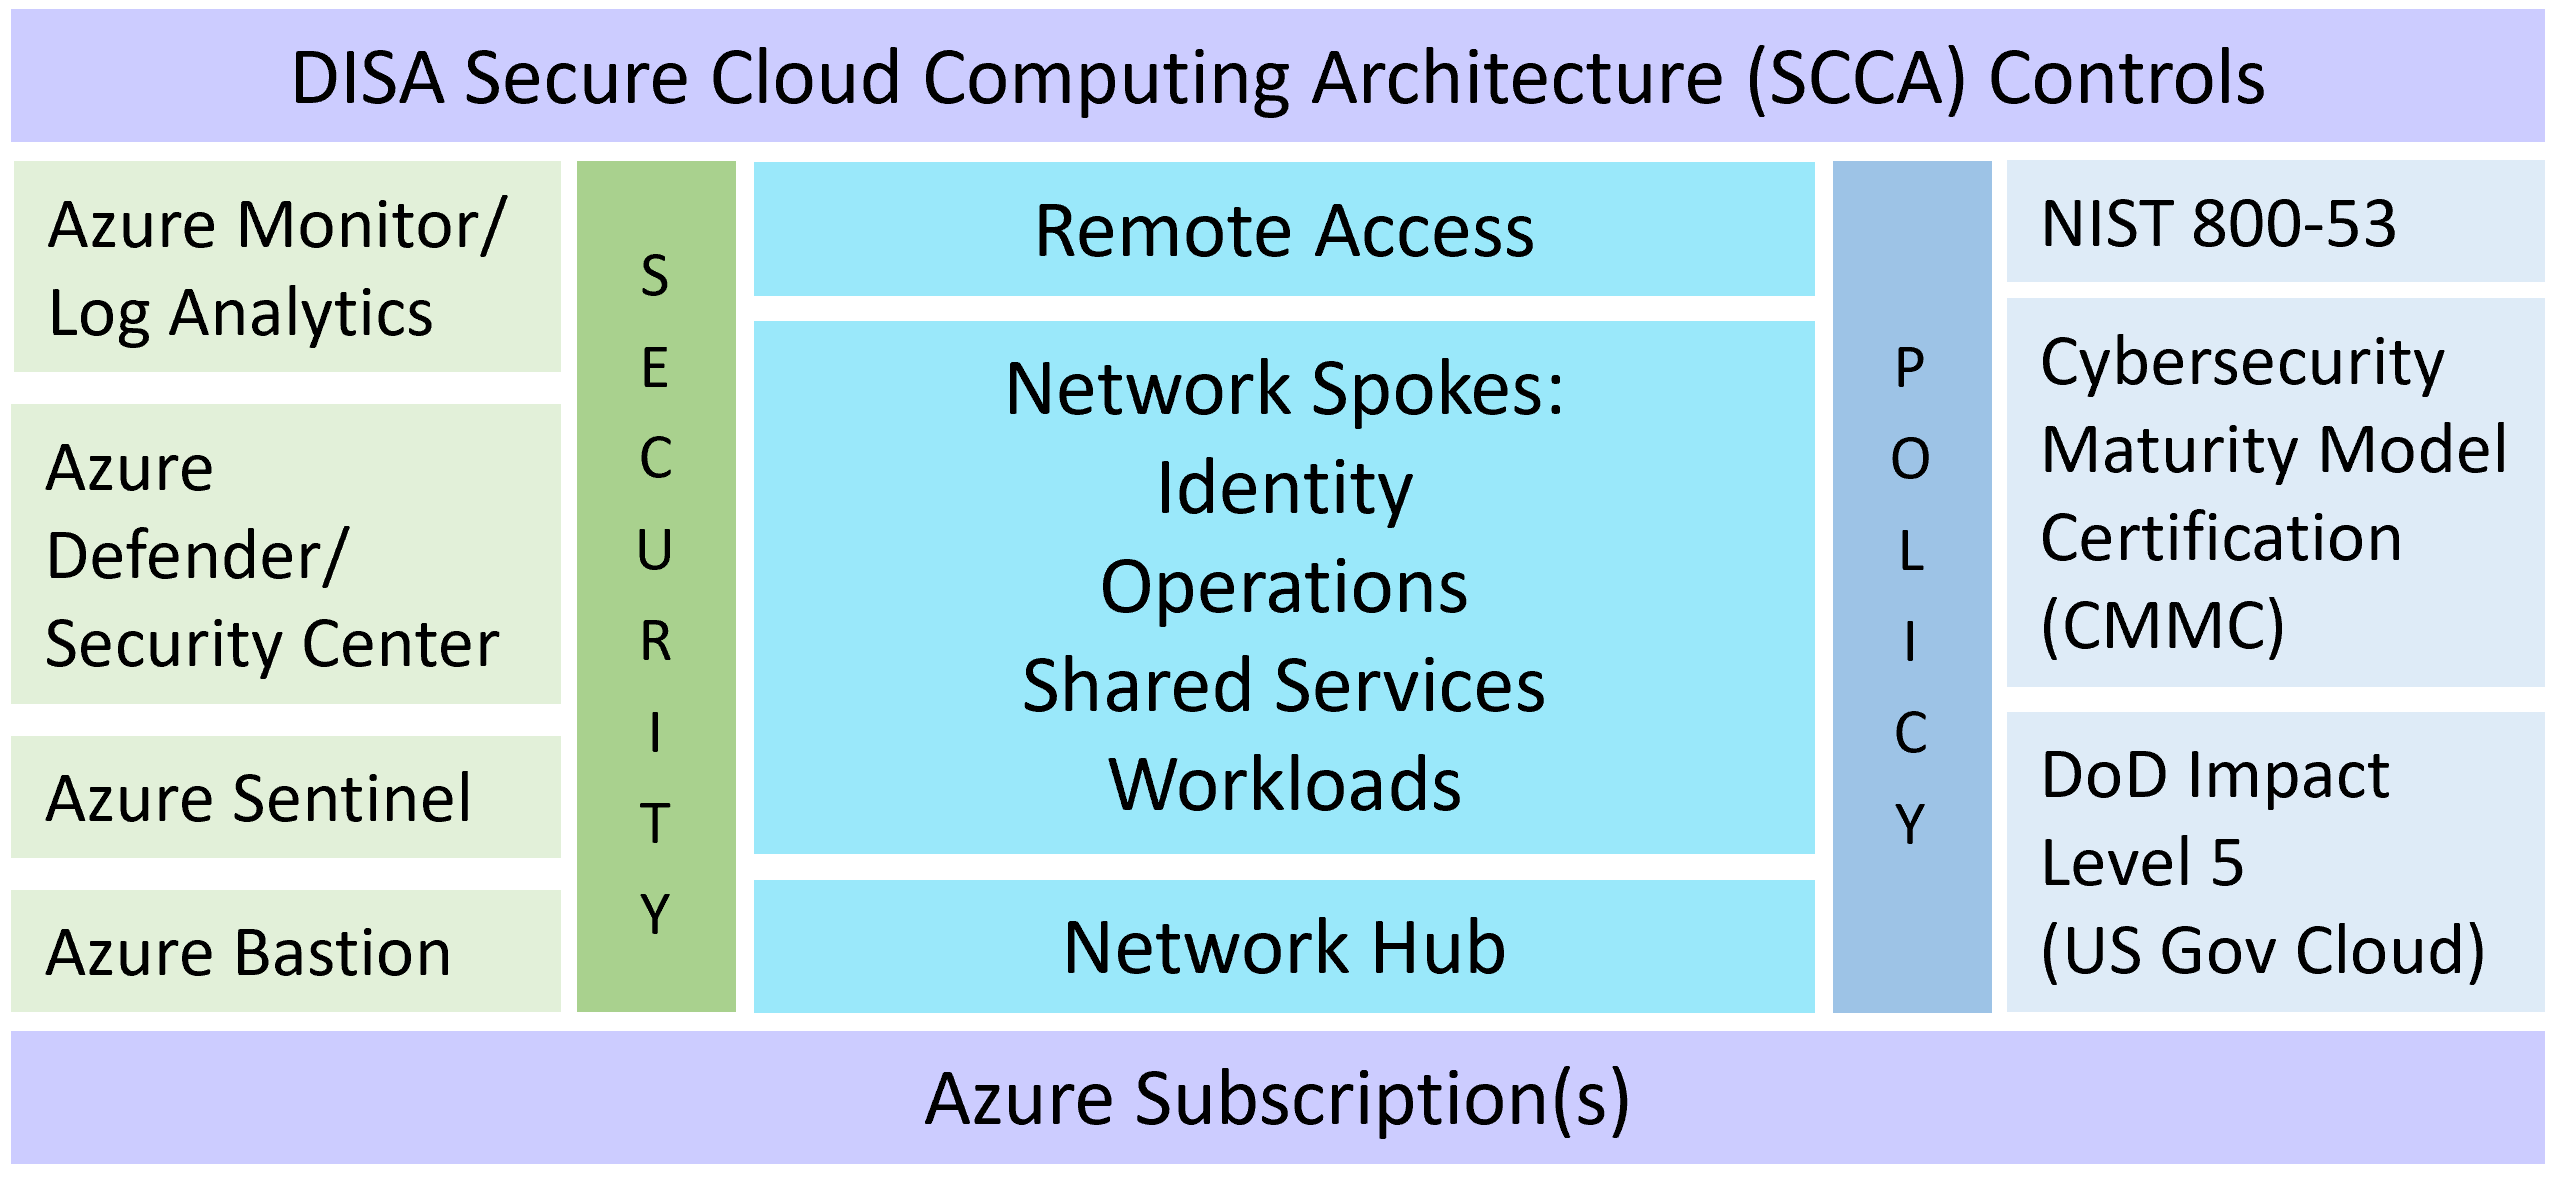 A table of the components Mission LZ provisions in Azure beneath a rectangle labeled DISA Secure Cloud Computing Architecture Controls